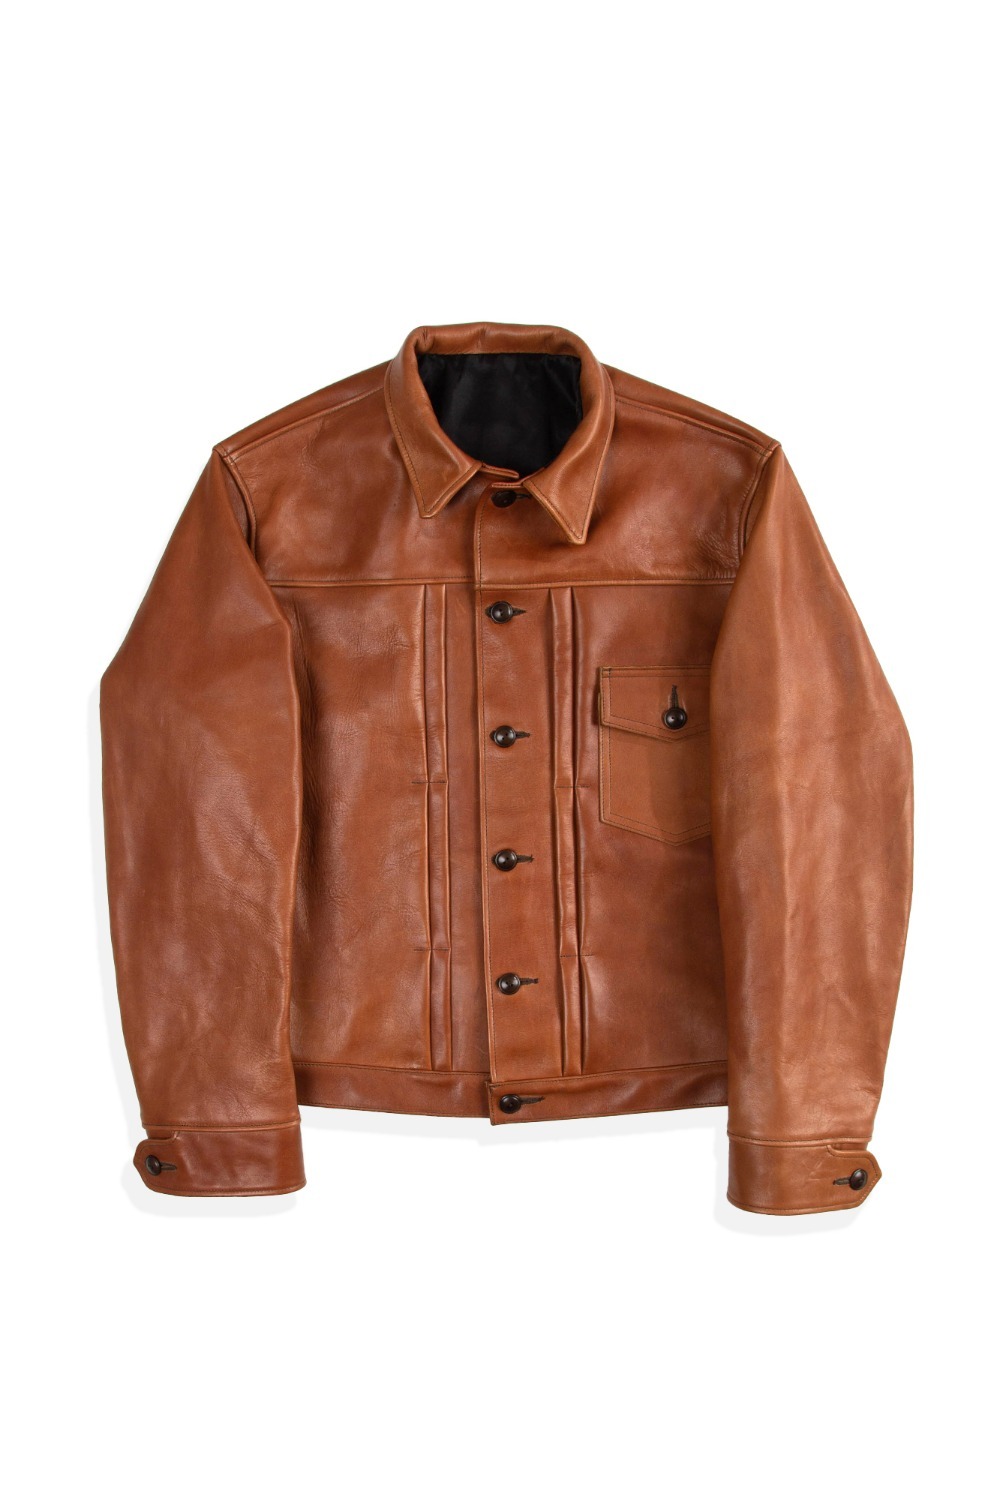 LOT 2147 1ST TYPE LEATHER JACKET BROWN